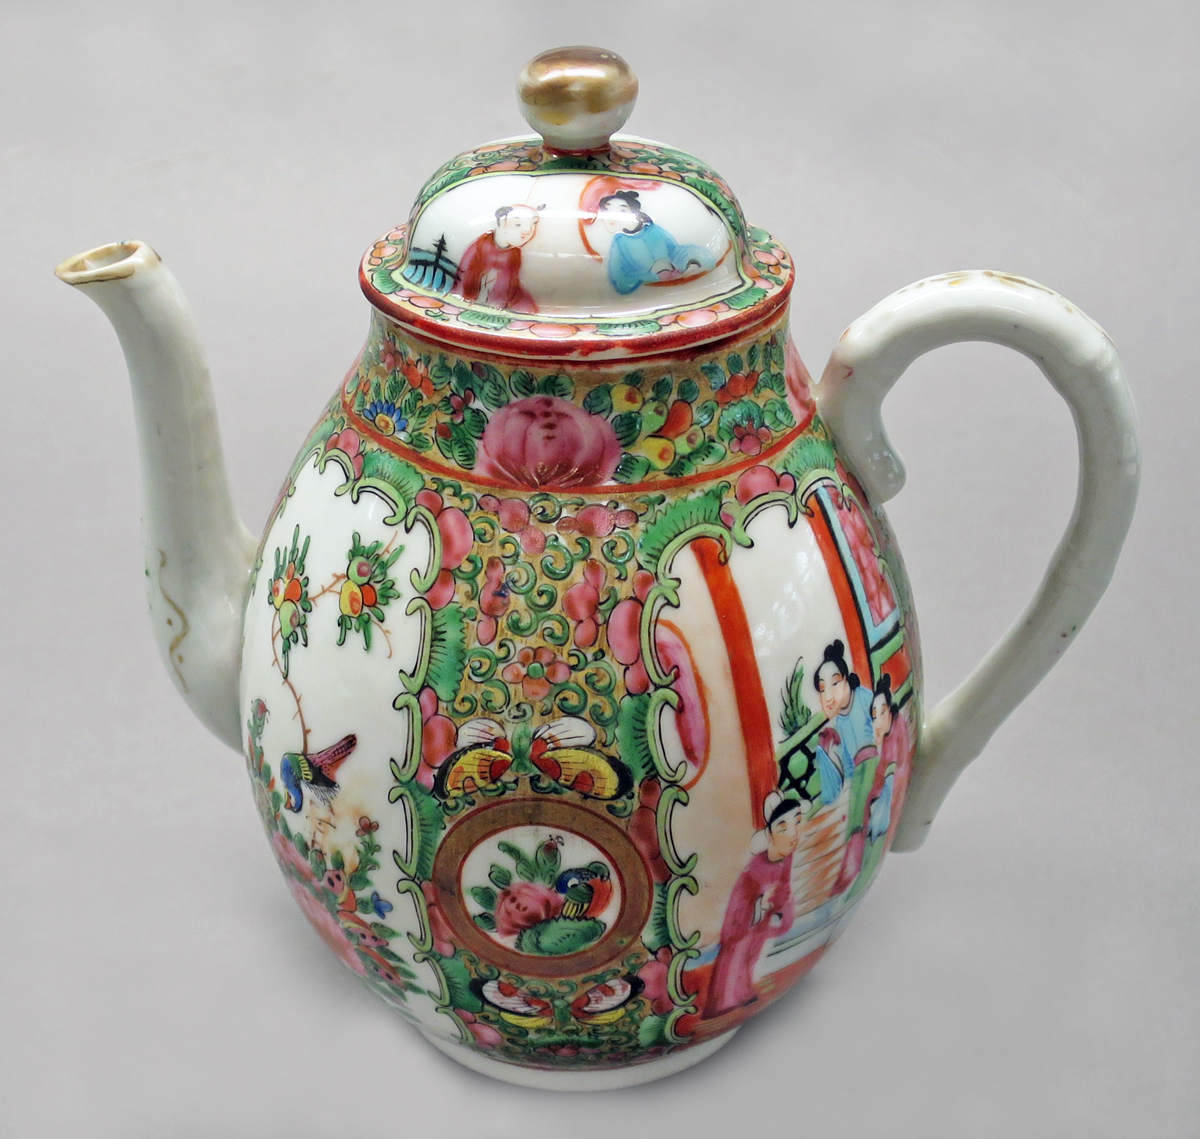 2014.0016.230 A, B Teapot and lid, overall